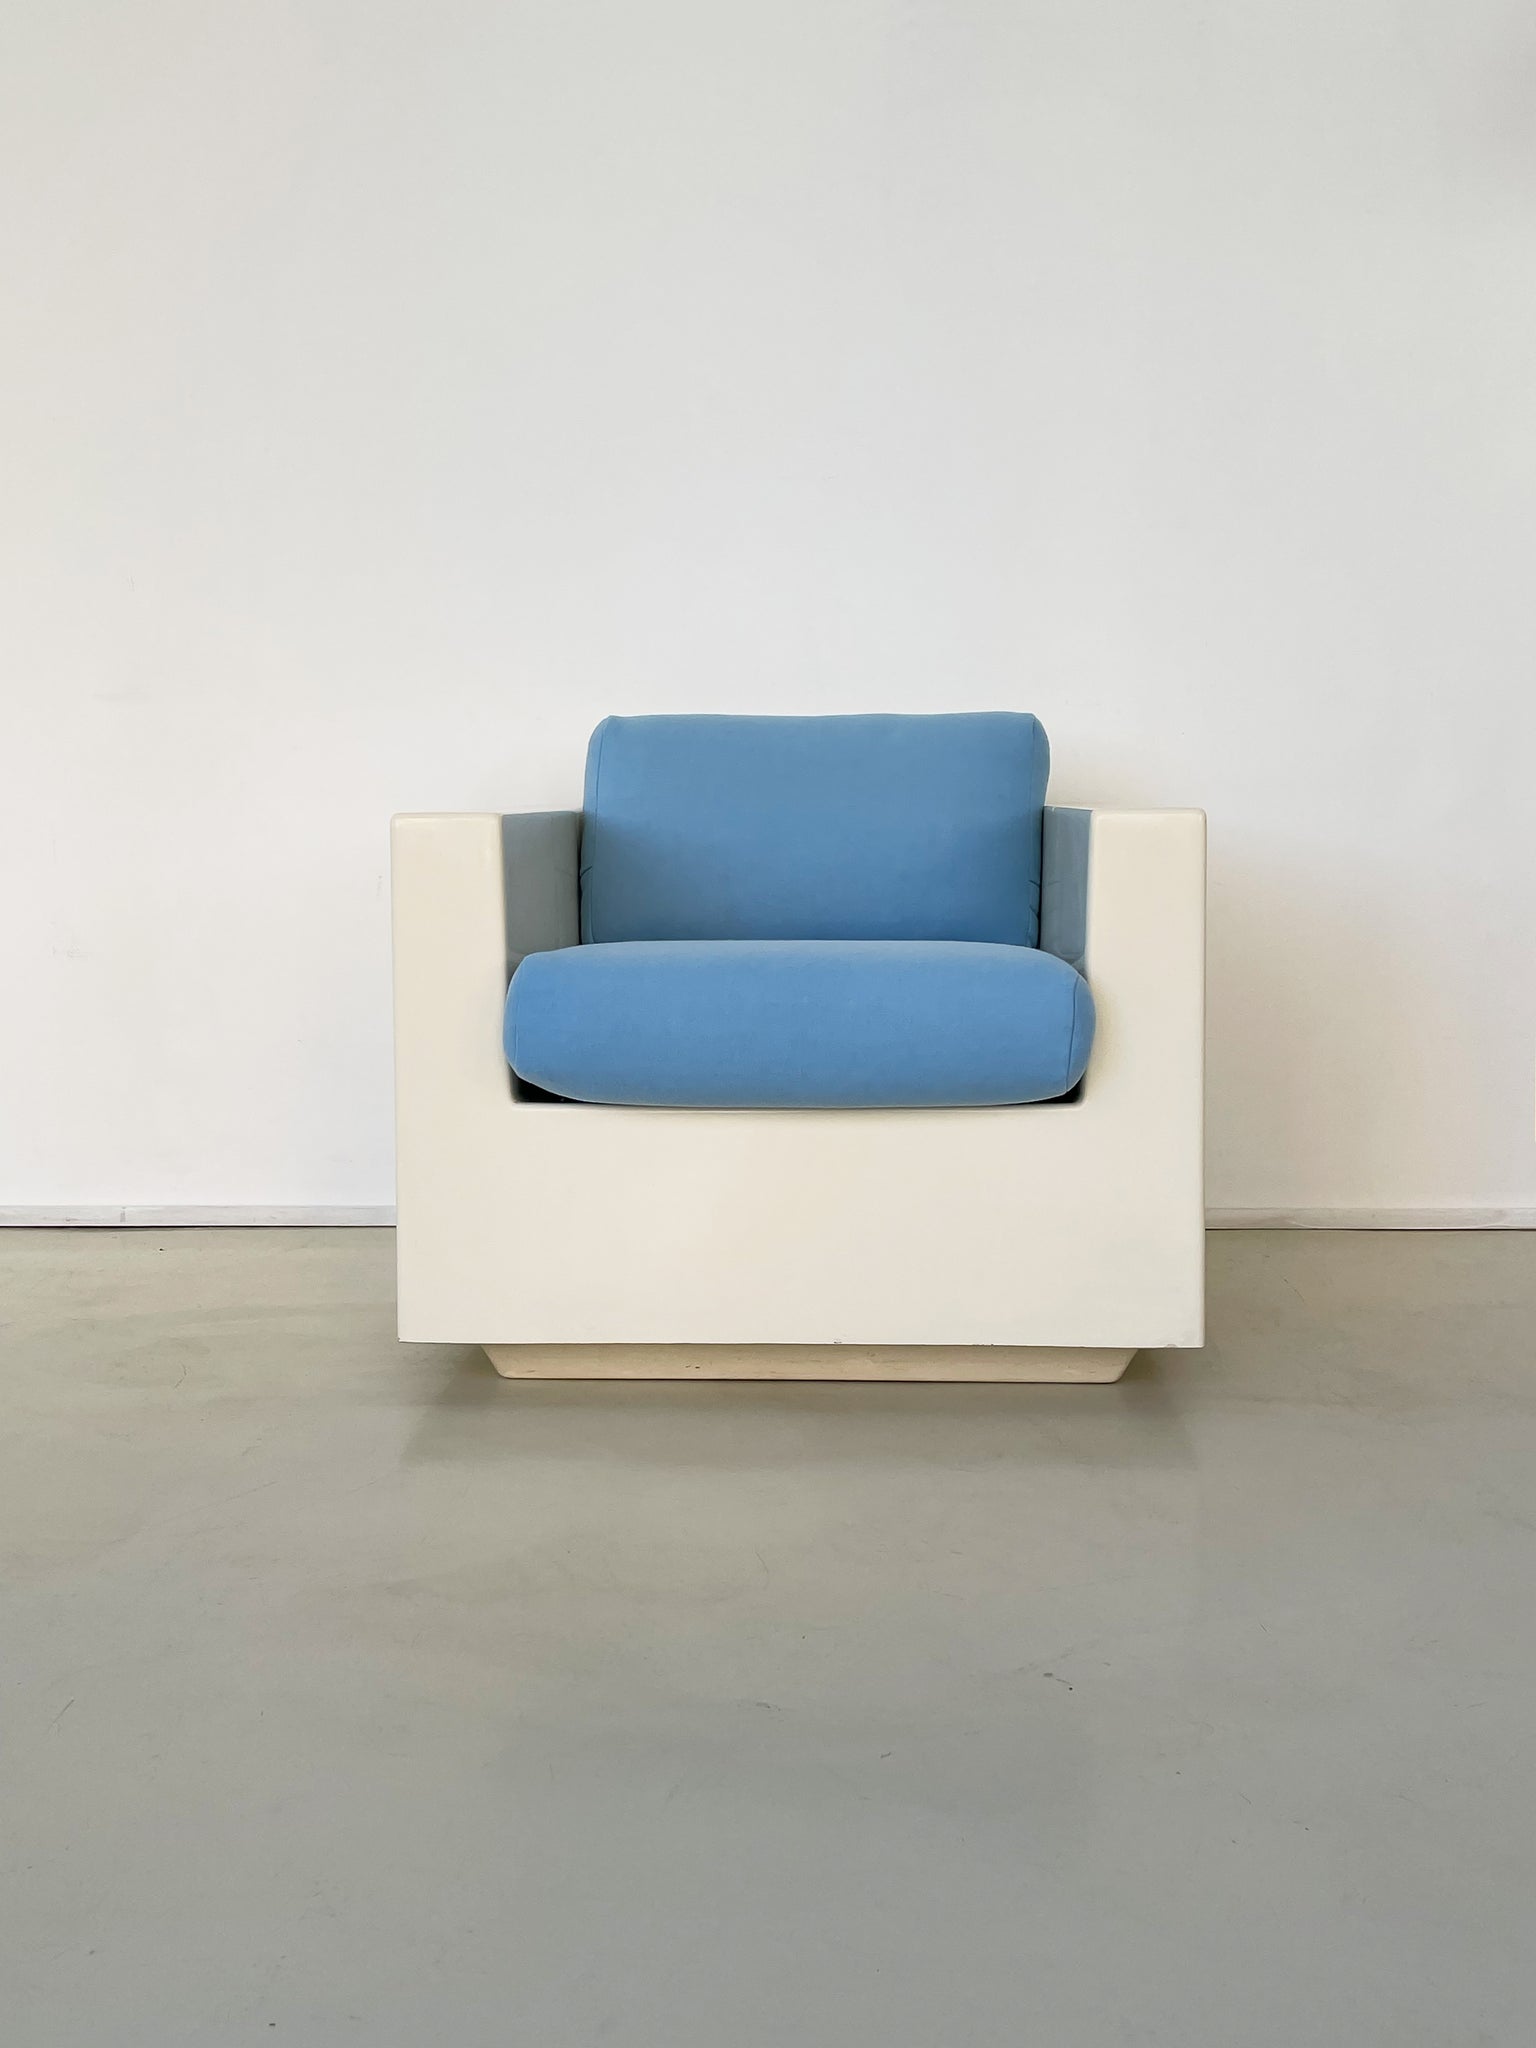 1970s Molded Fiberglass Club Chair with Blue Cushions